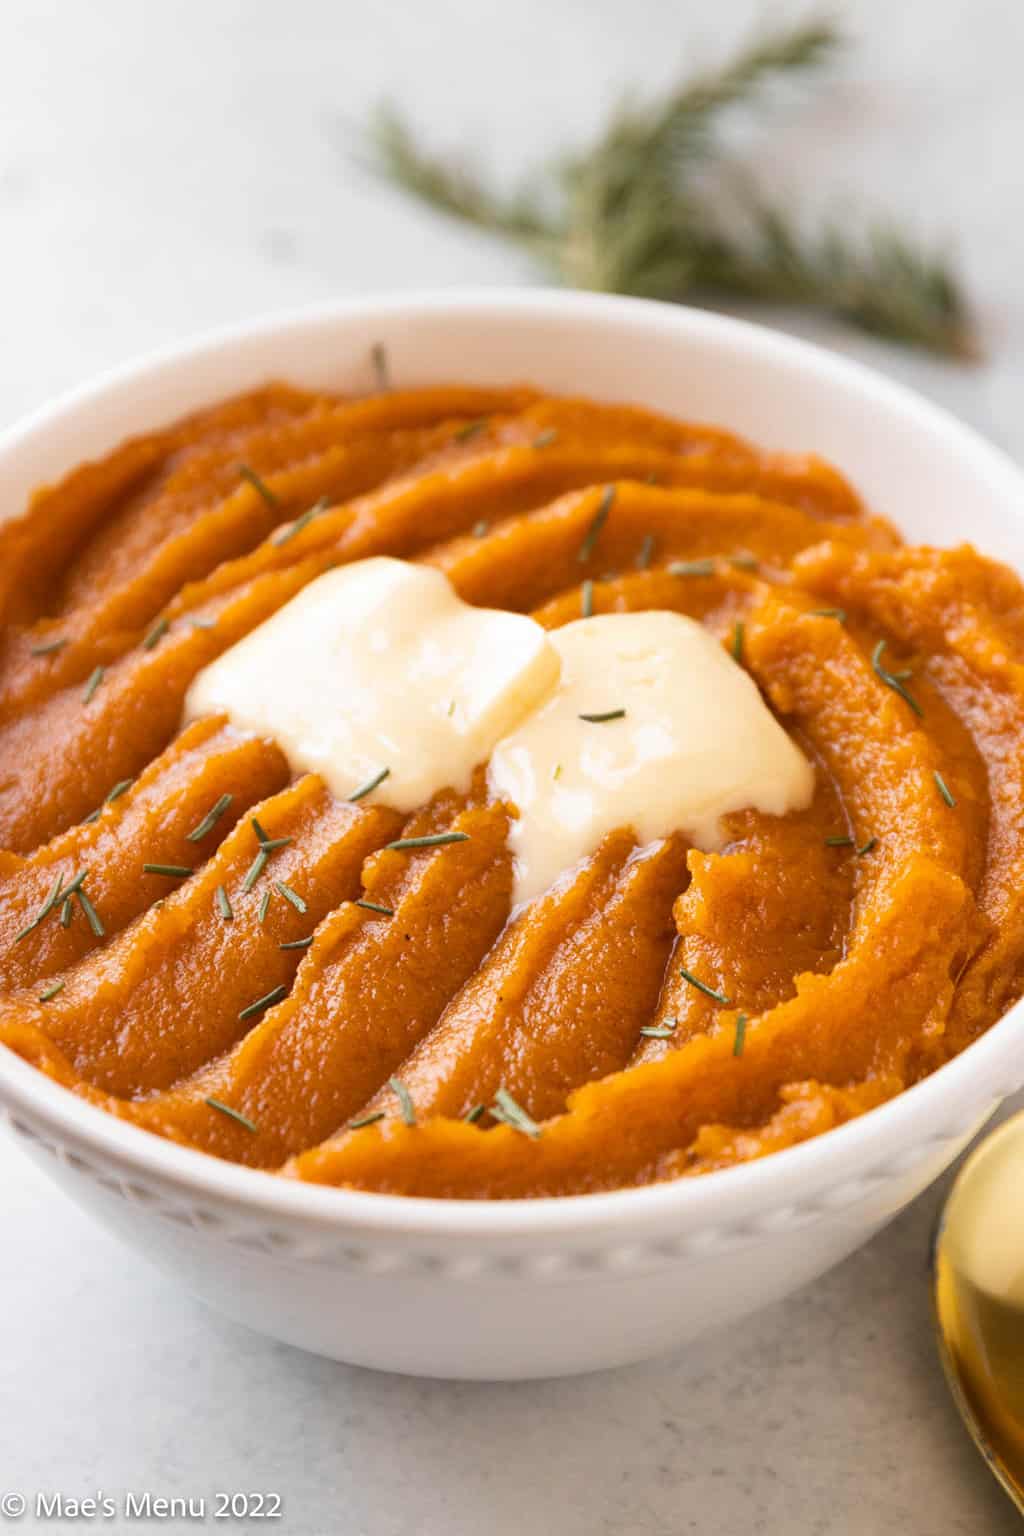 An up-close side shot of a large bowl of whipped sweet potatoes with pats of melted butter.